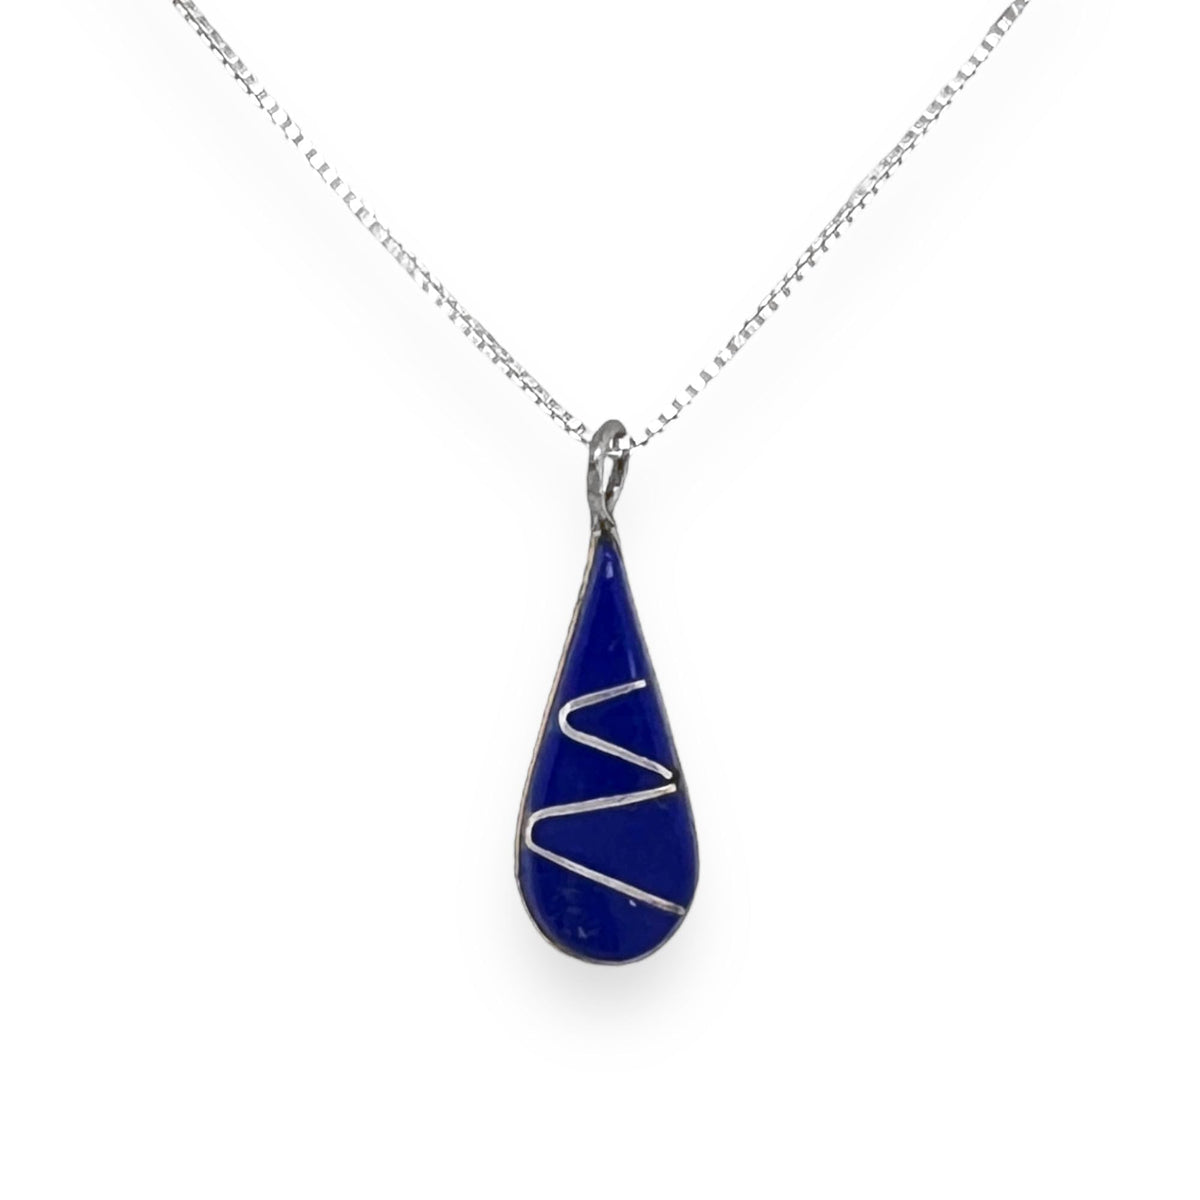 Genuine Lapis Lazuli Necklace, Sterling Silver, Pendant with Chain, Navajo Native American Handmade, Small Teardrop, Navy Blue Jewelry